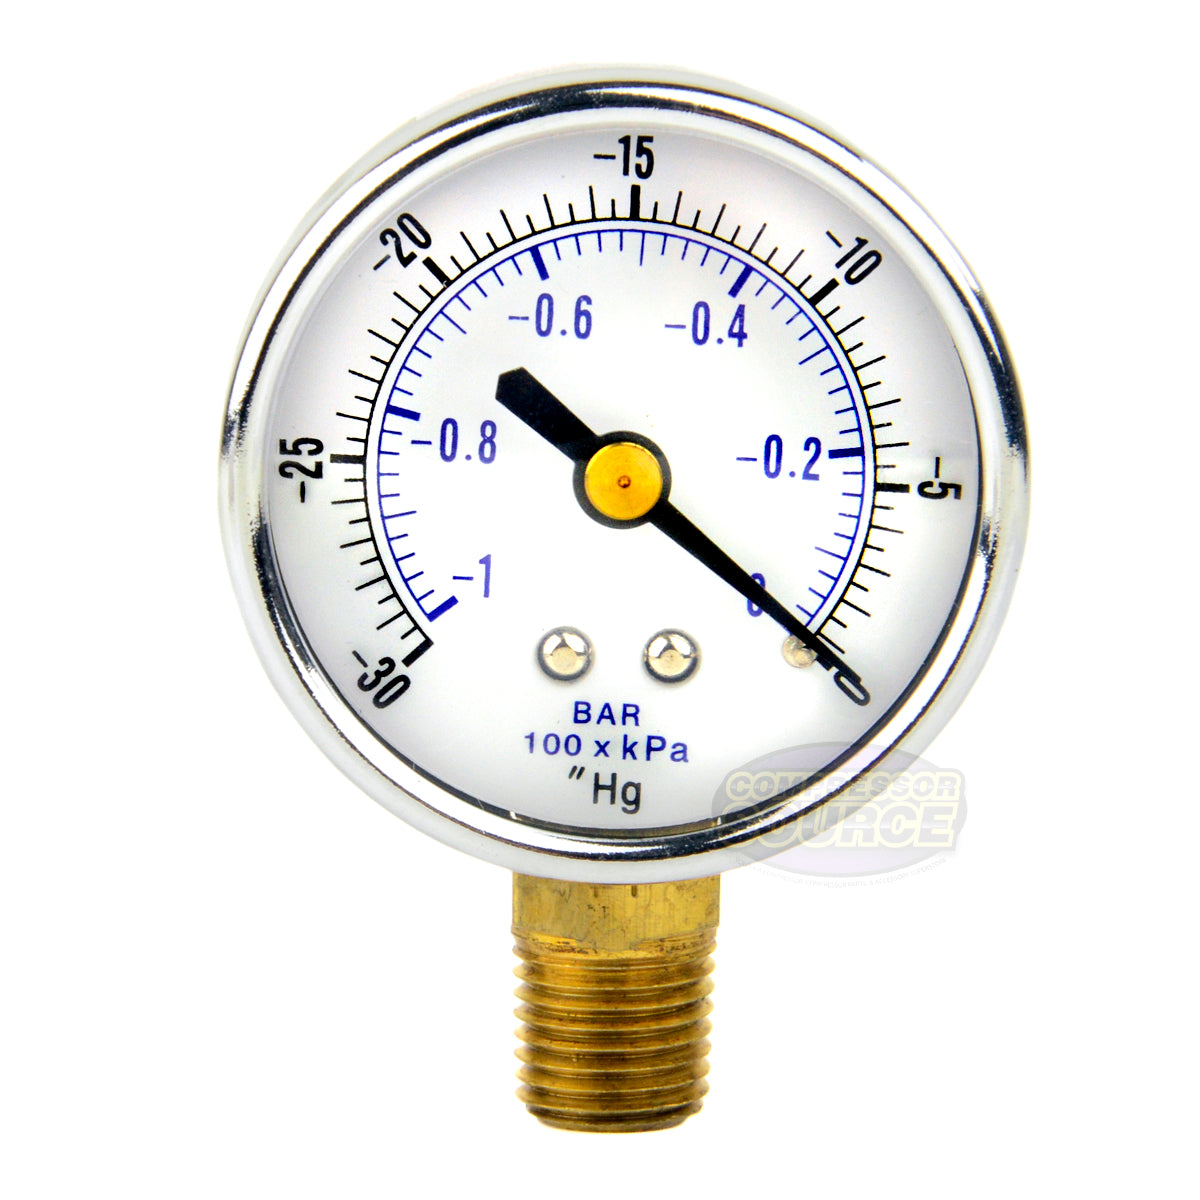 1/4" NPT 0 to -30 PSI Vacuum Air Pressure Gauge Lower Side Mount With 2" Face